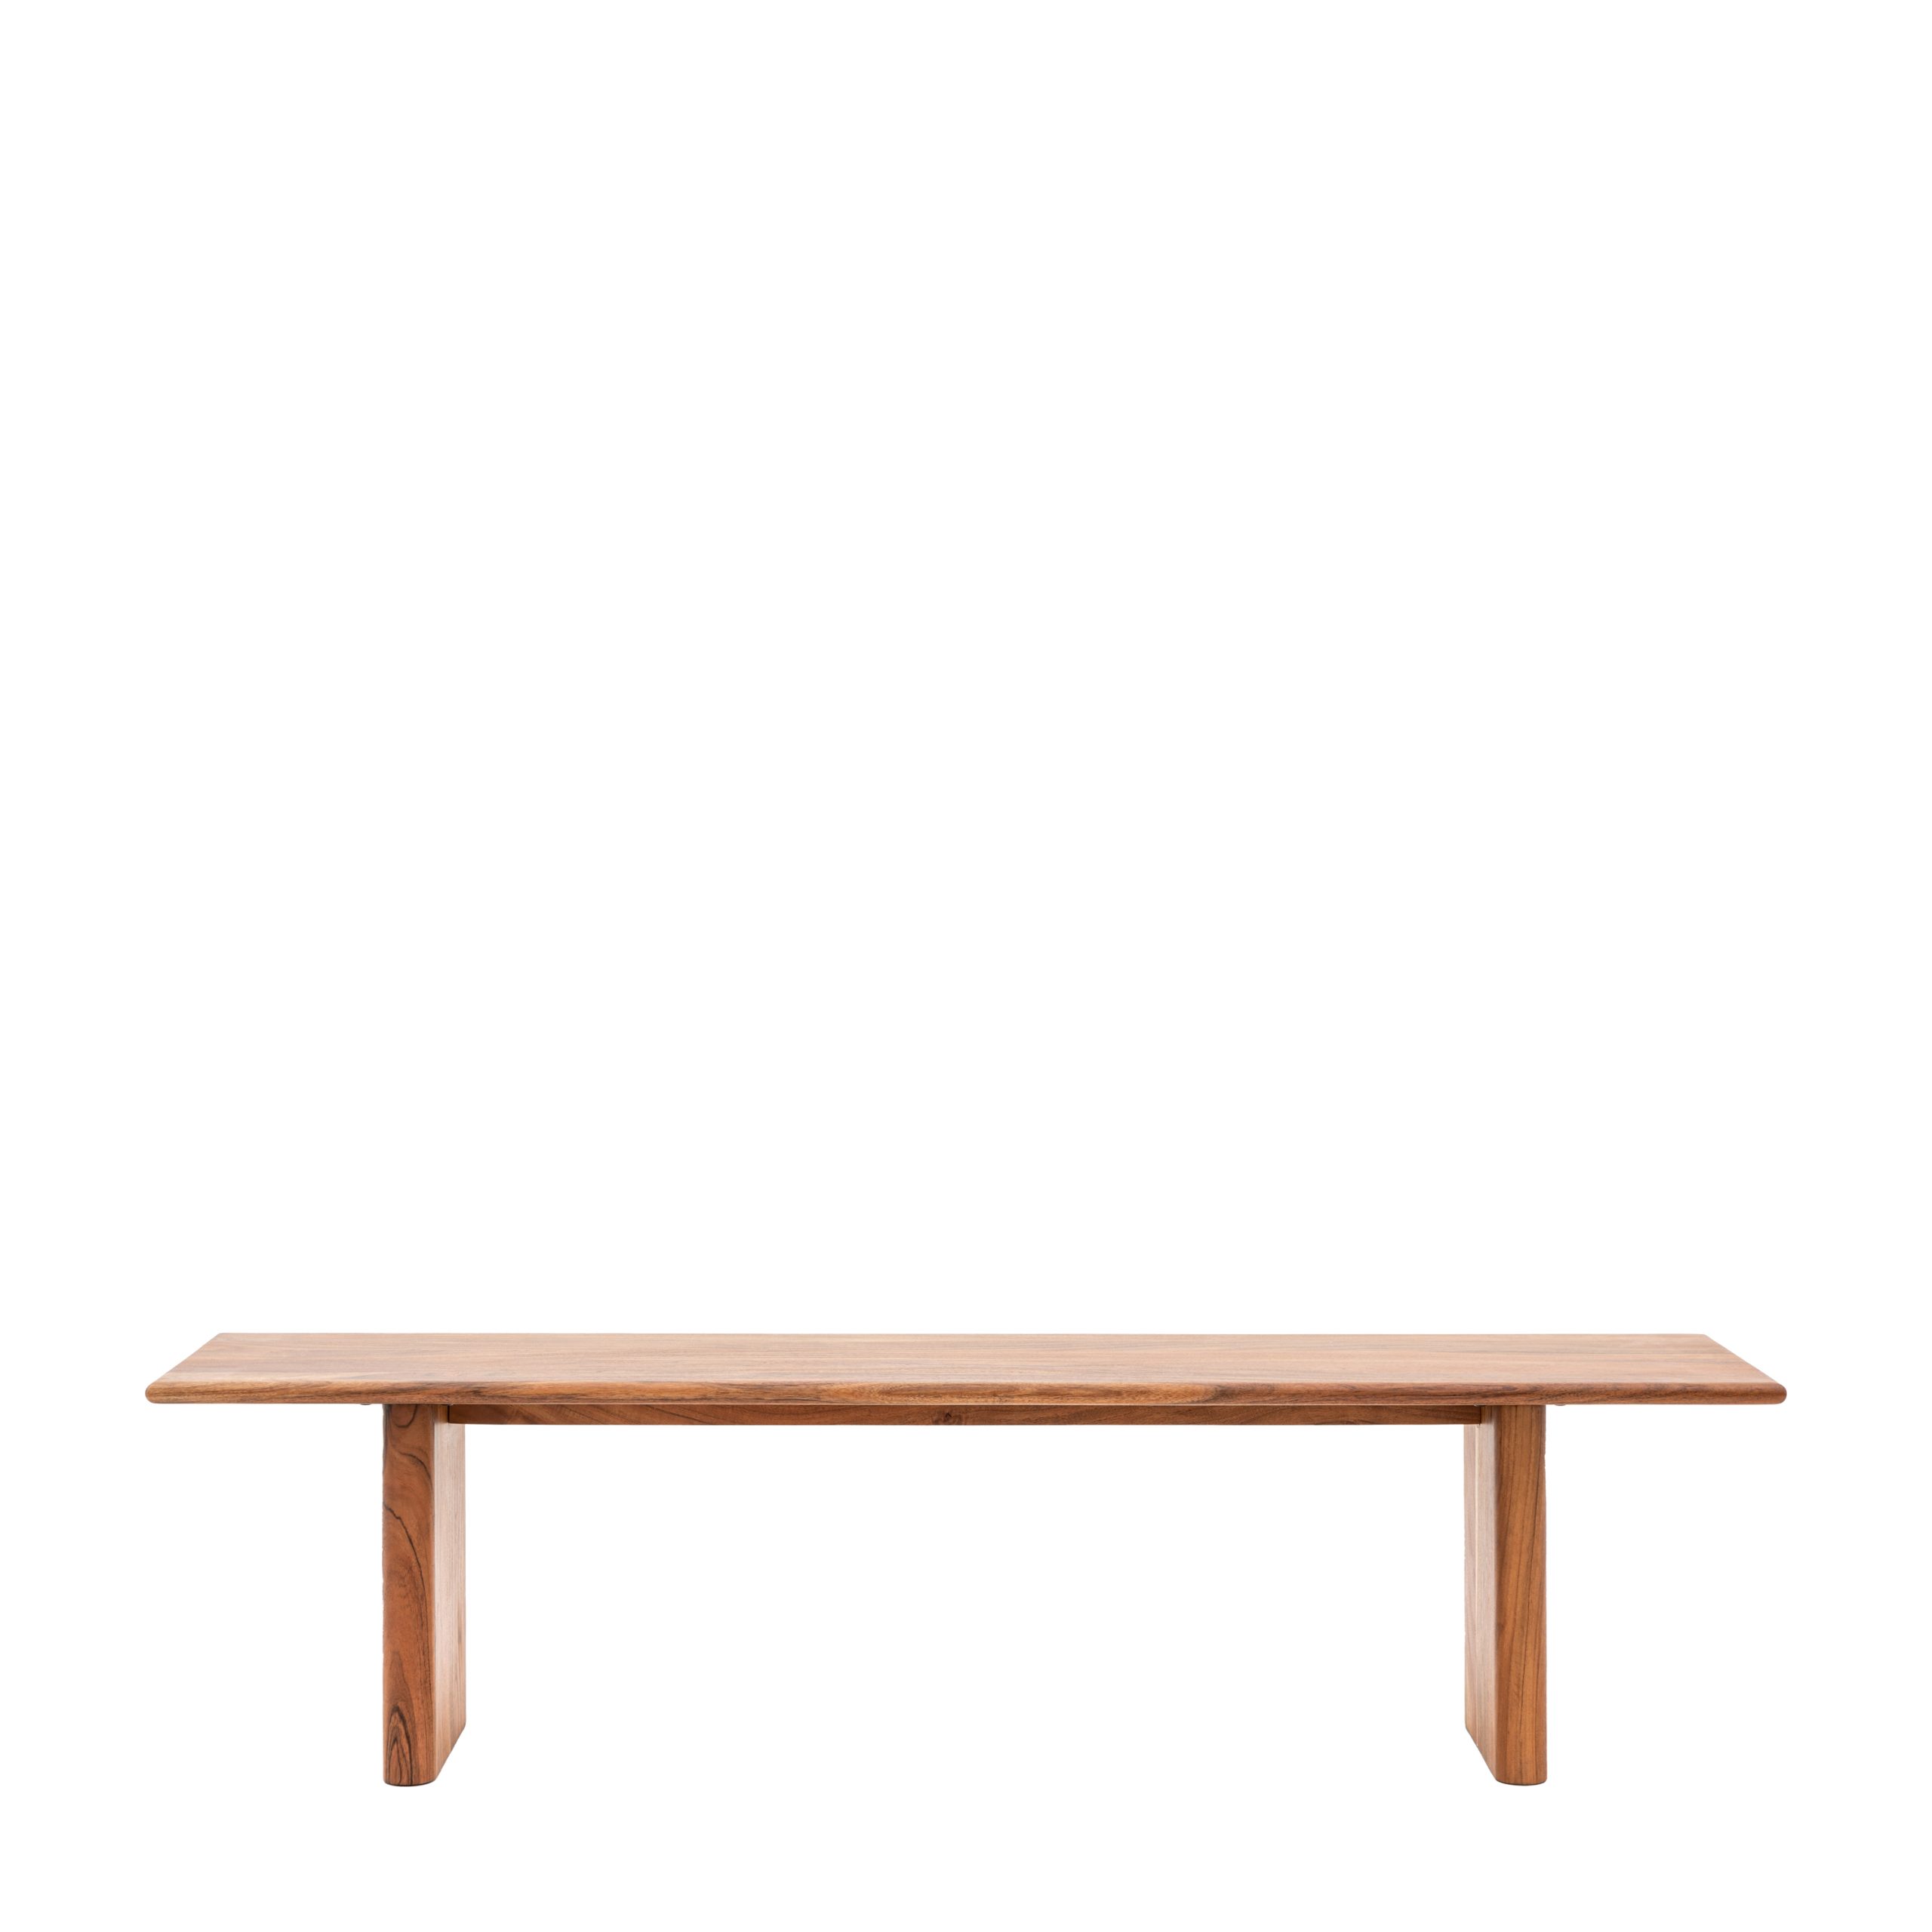 Gallery Direct Borden Dining Bench